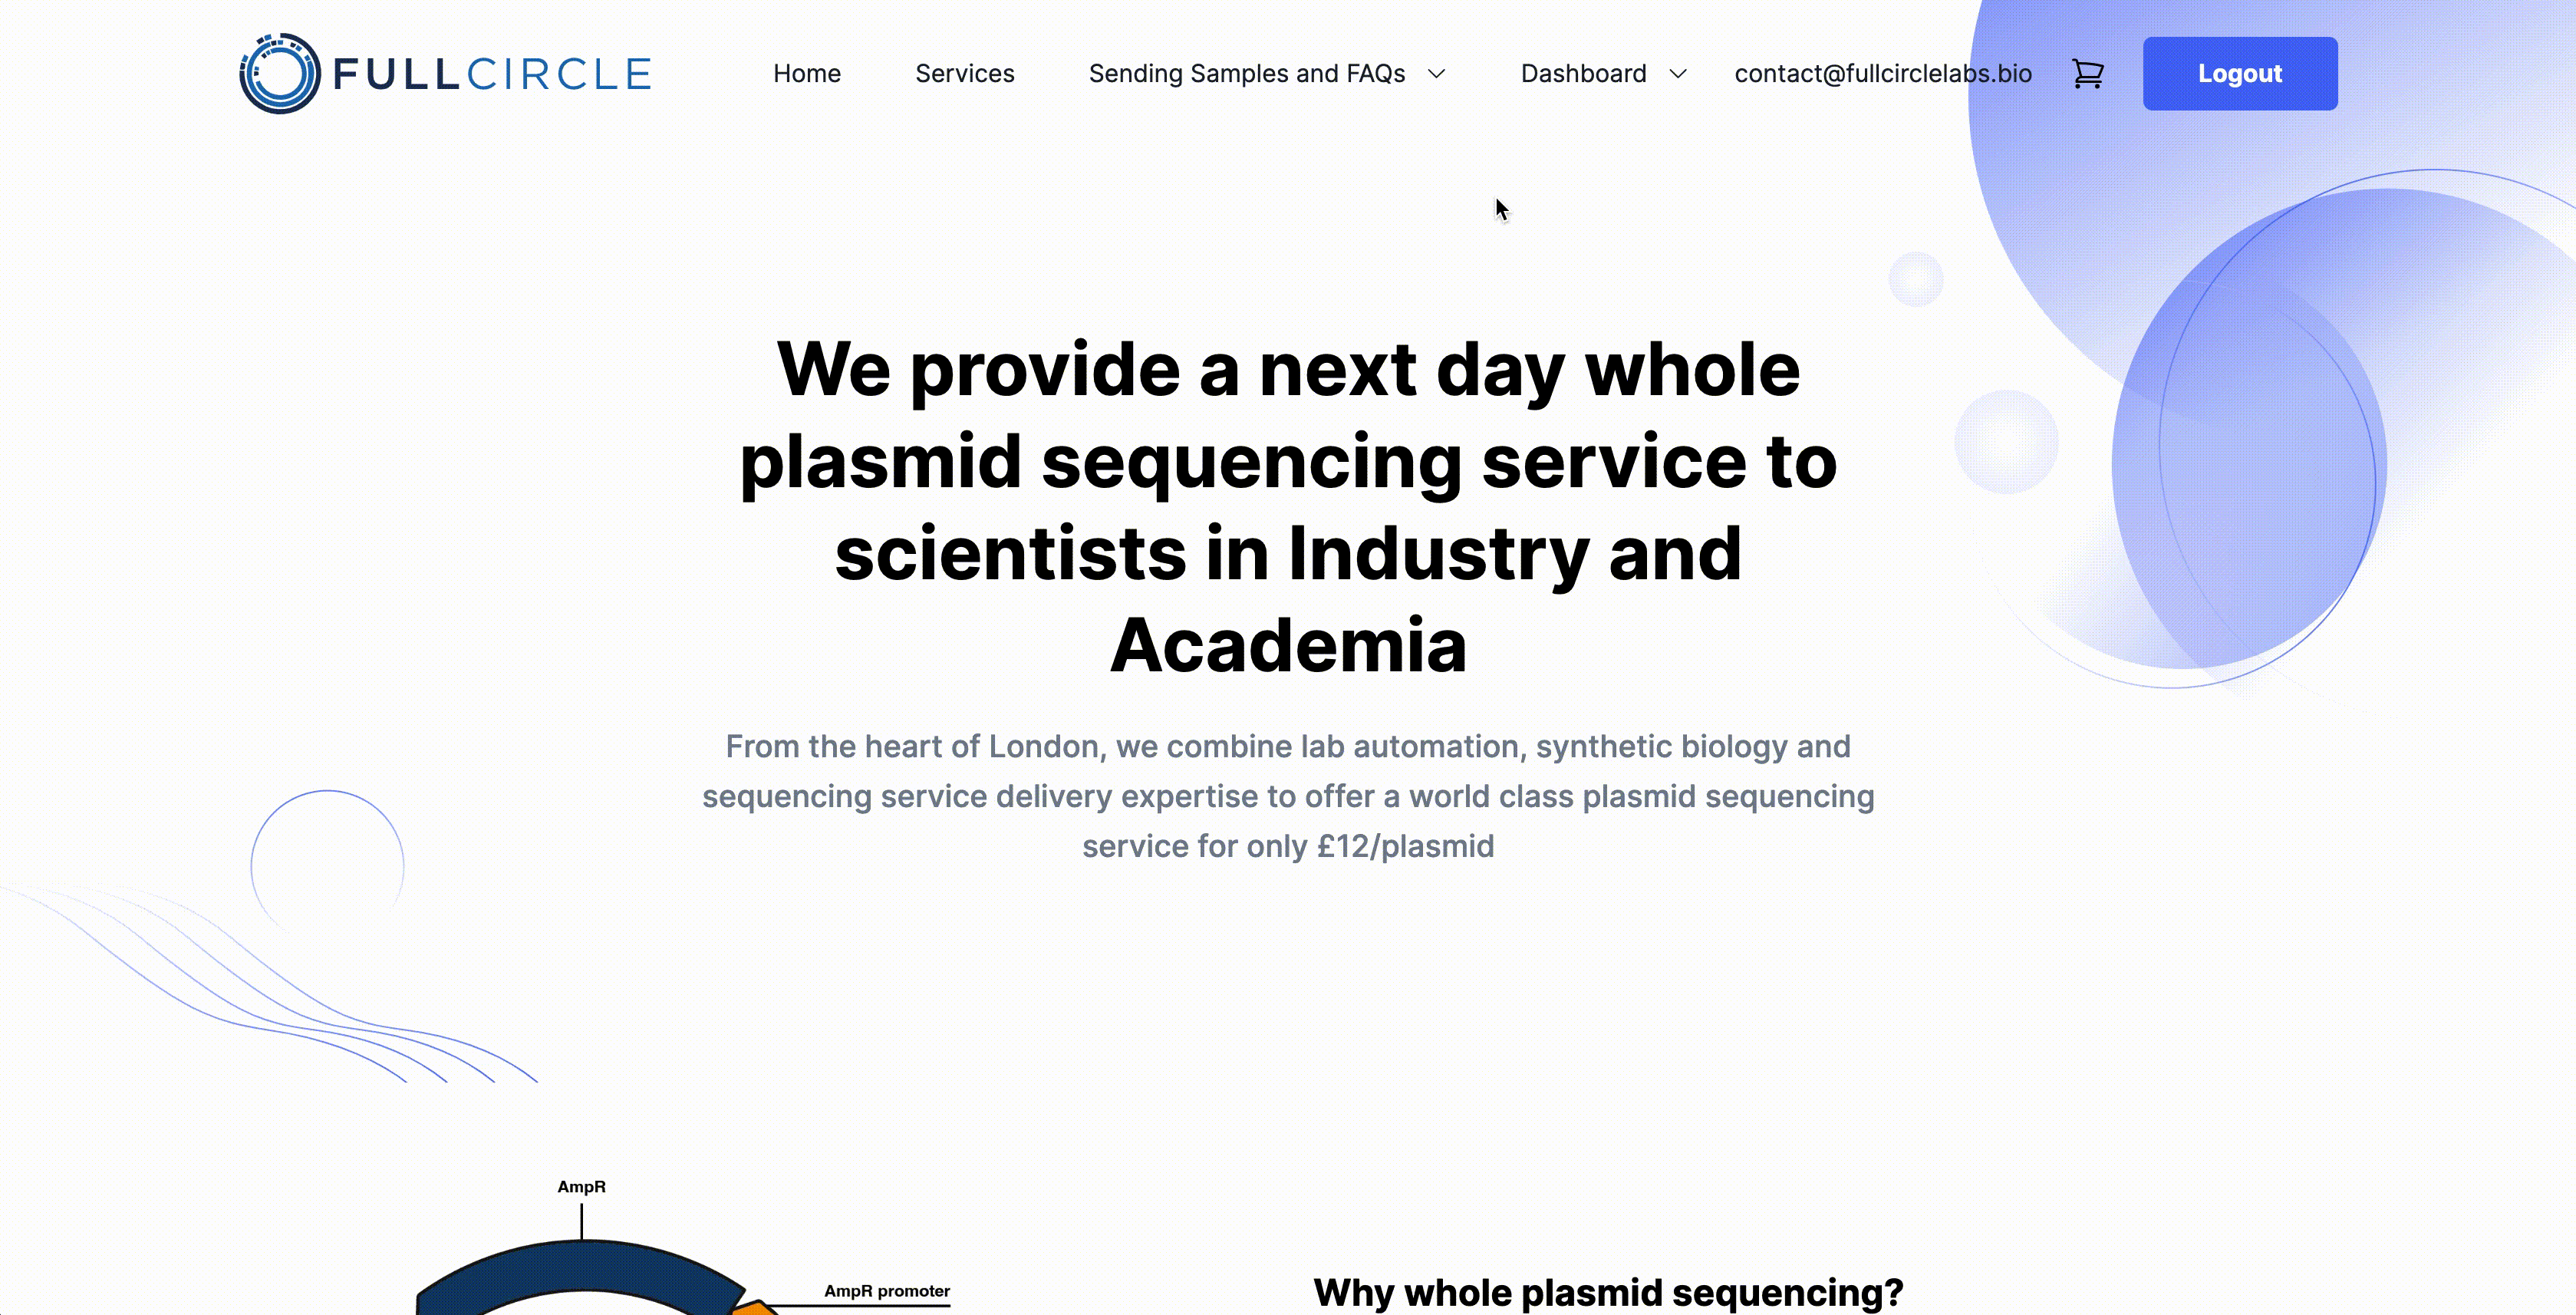 Animation showing the user navigating from the home page to the Order Product page in their dashboard and ordering some Whole Plasmid Sequencing.